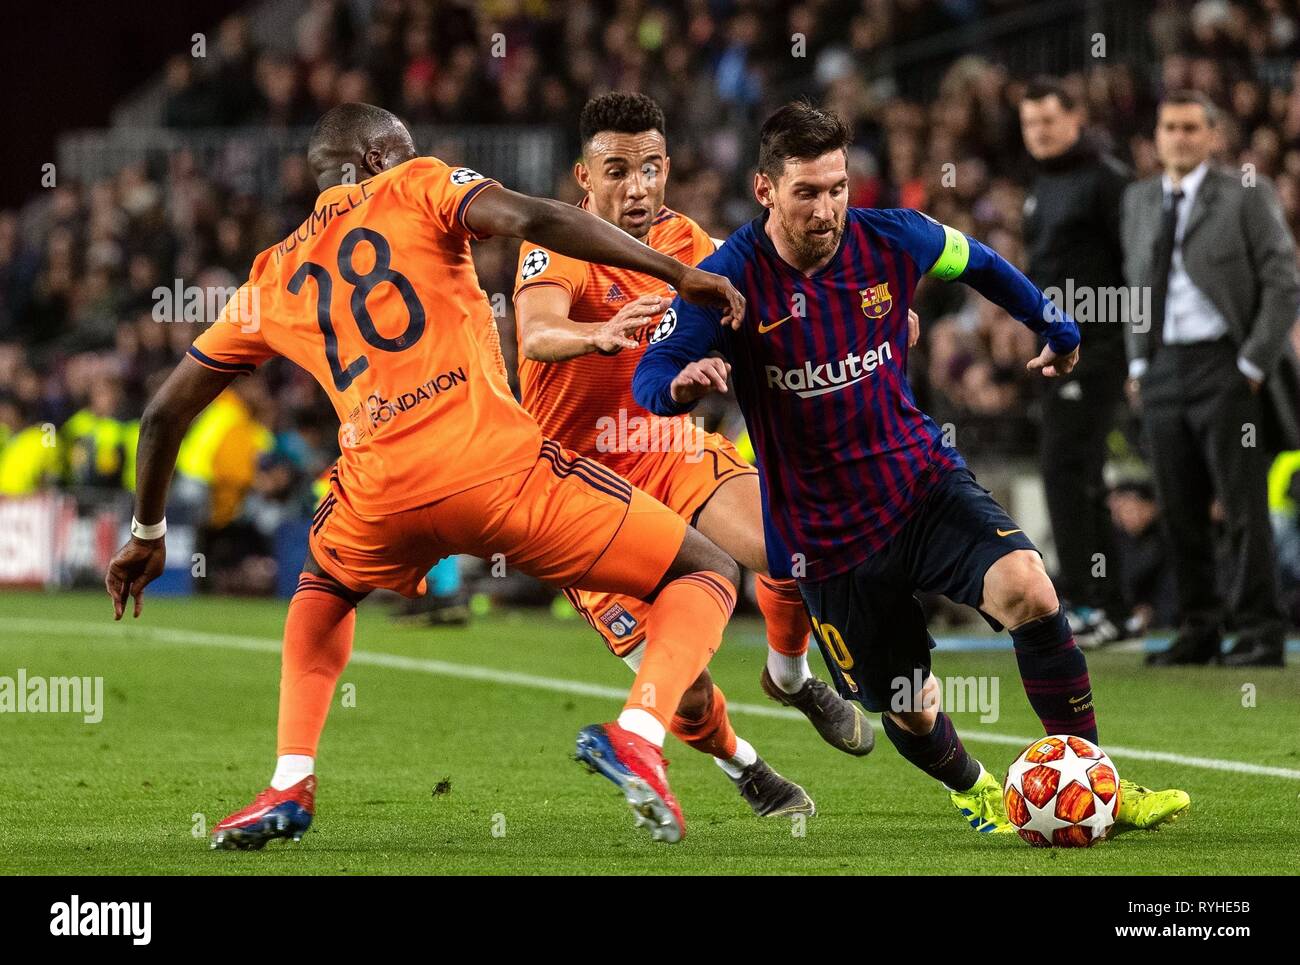 Barcelona, Spain. 13th Mar, 2019. Barcelona's Lionel Messi (R) vies with Lyon's Tanguy NDombele (L) and Fernando Marcal during the UEFA Champions League match between Spanish team FC Barcelona and French team Lyon in Barcelona, Spain, on March 13, 2019. Barcelona won 5-1 and advanced to the quarterfinals. Credit: Joan Gosa/Xinhua/Alamy Live News Stock Photo